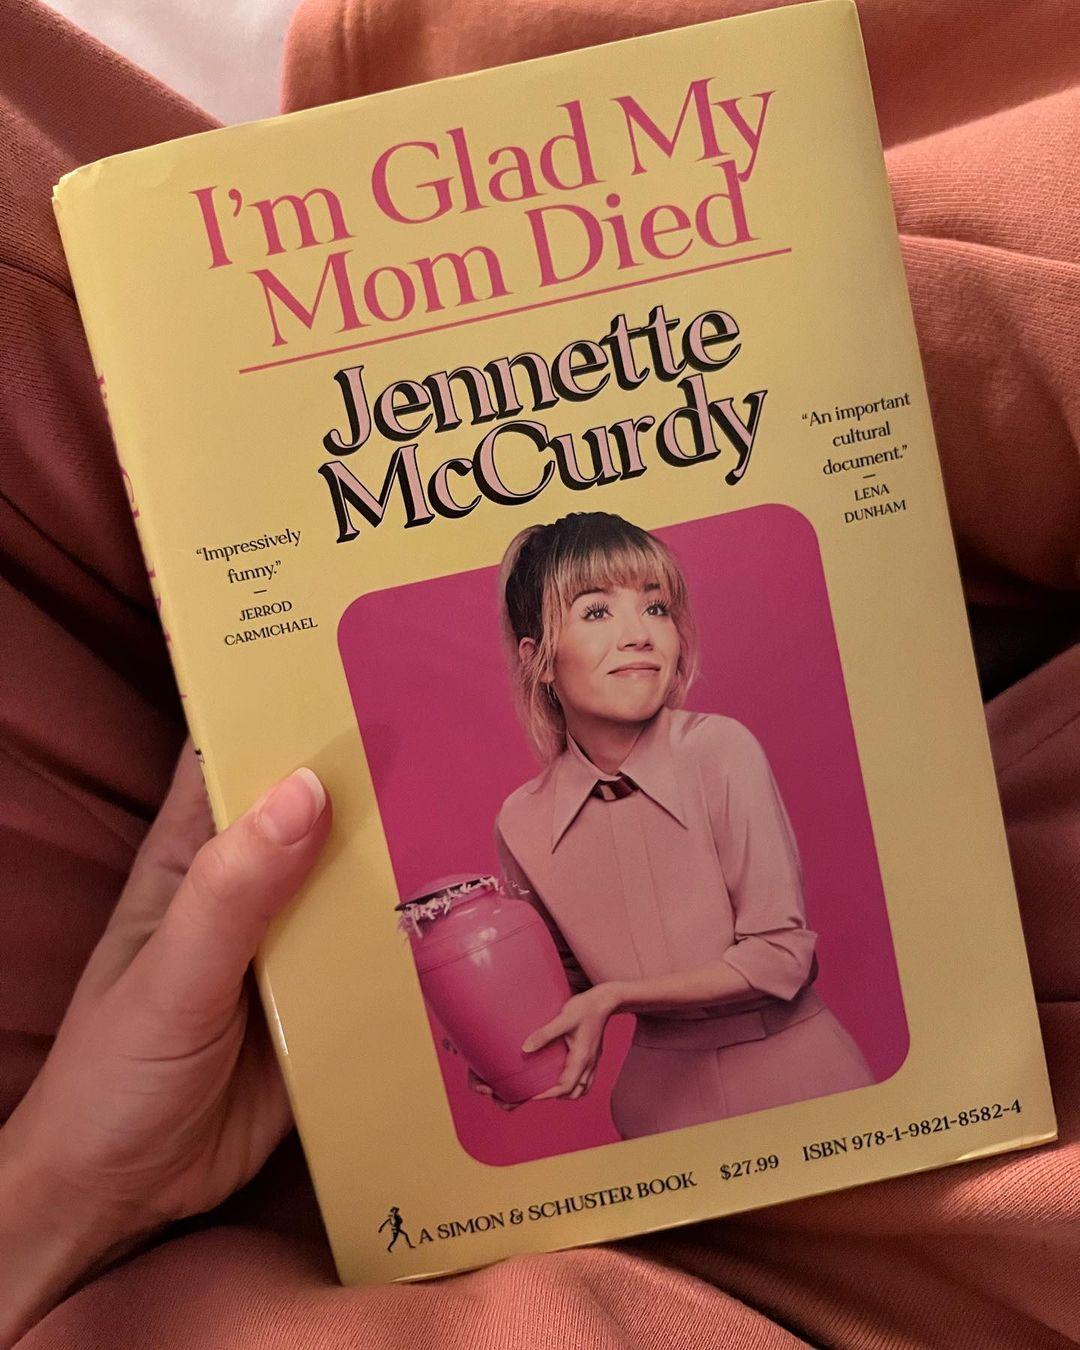 Jennette McCurdy's book